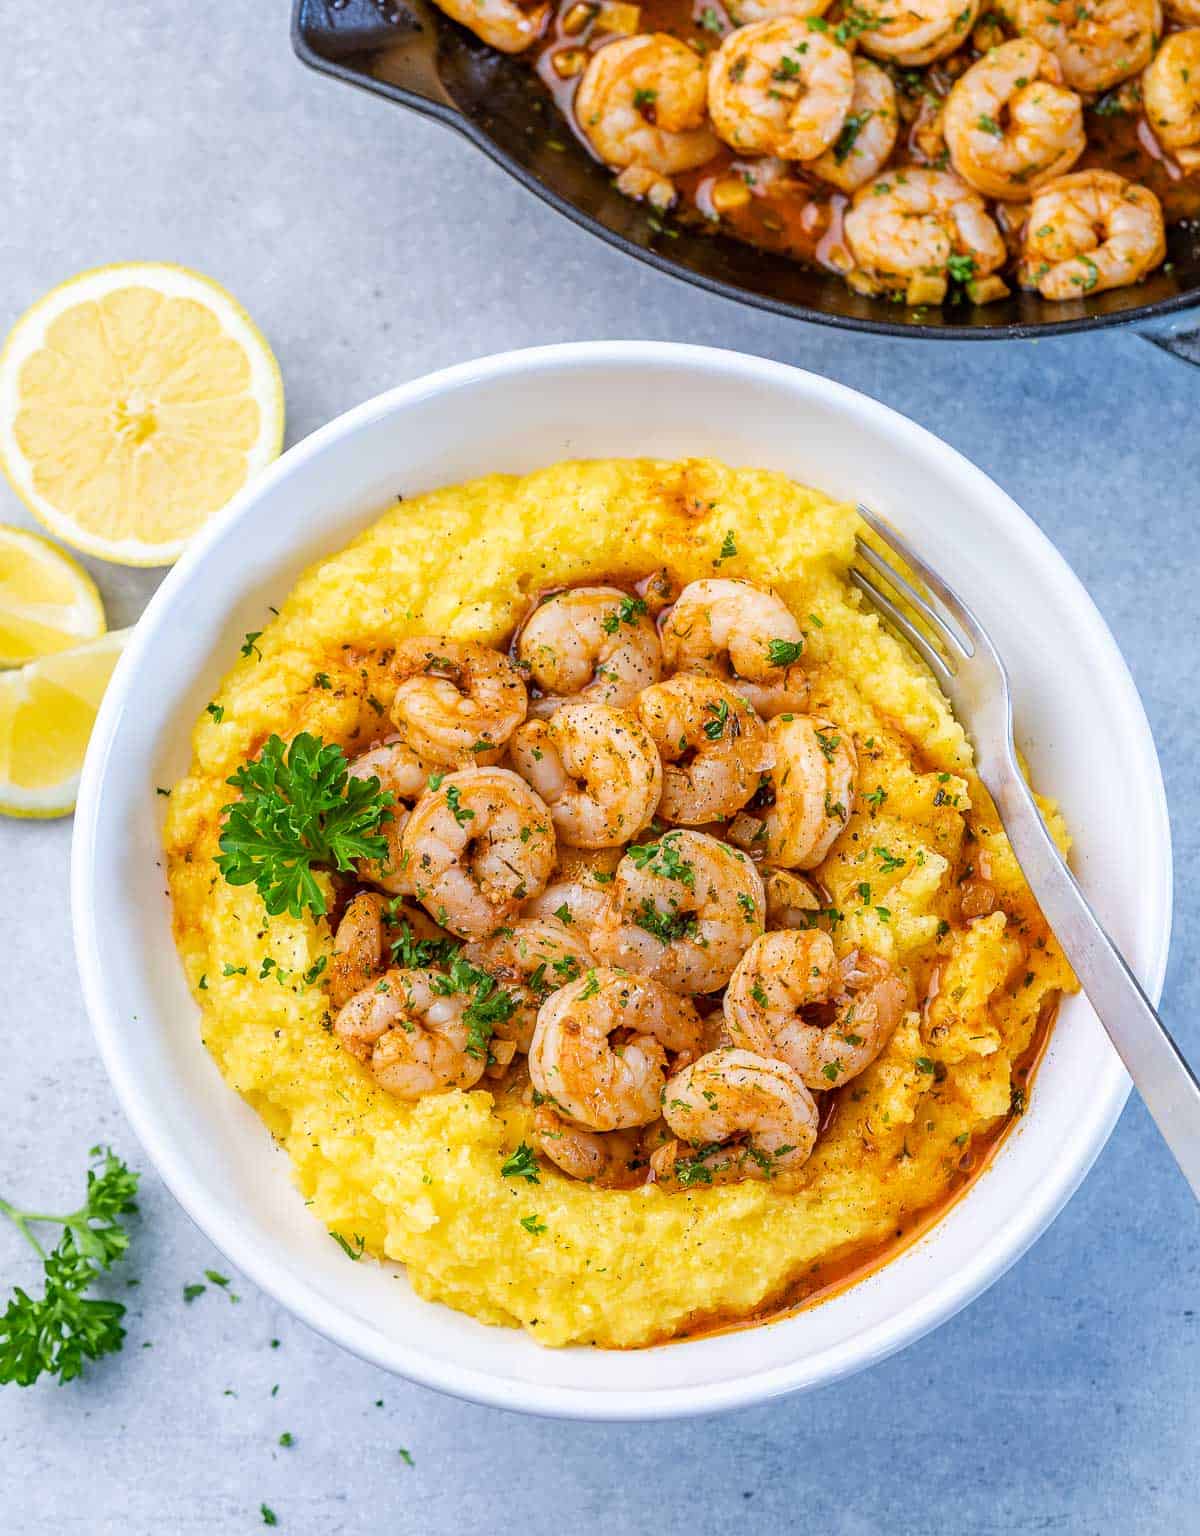 Top view of yellow grits in a round white plate topped with sautéed shrimp.